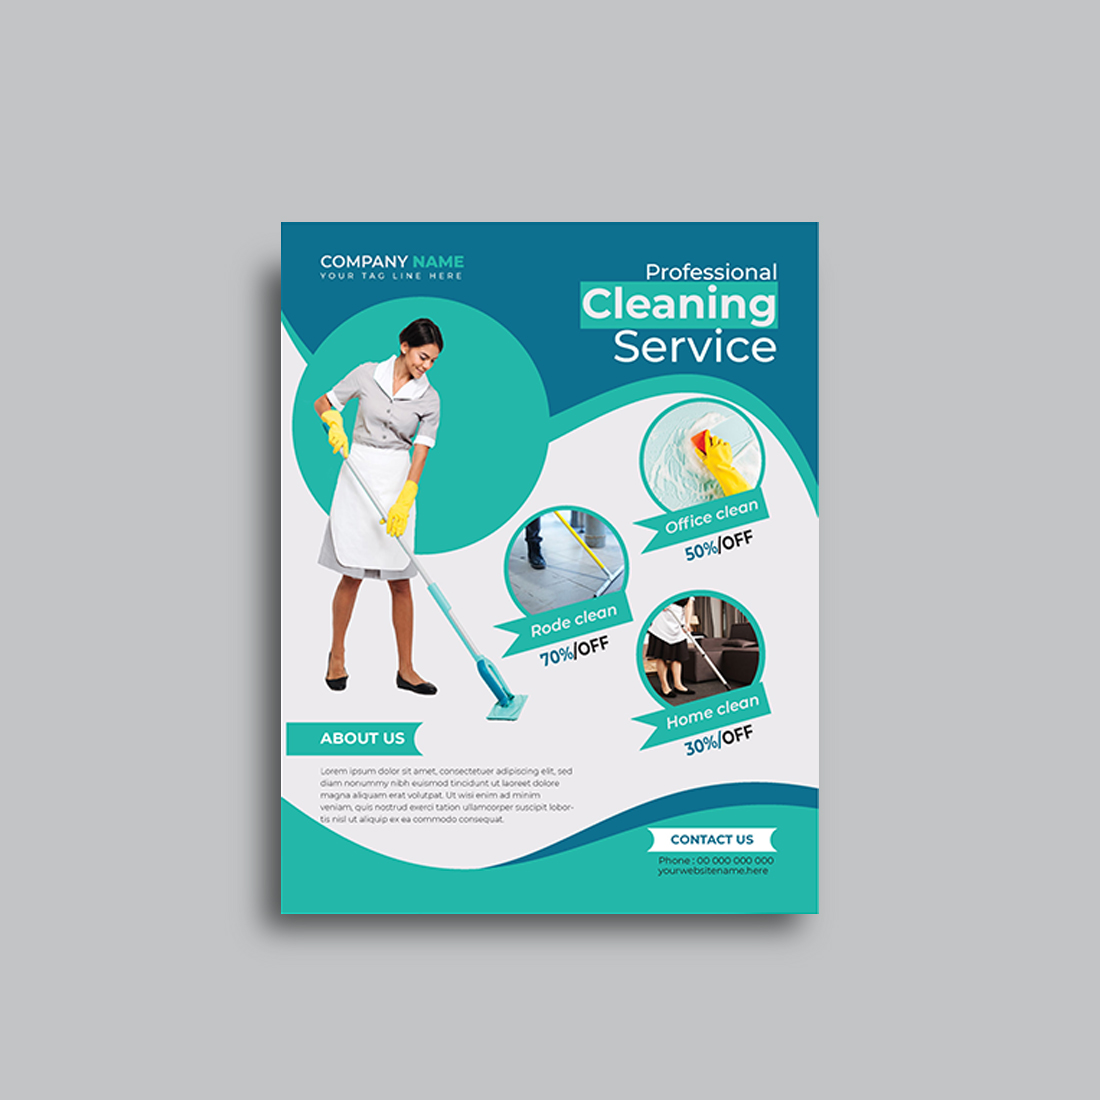 Cleaning Service Flyer Template cover image.